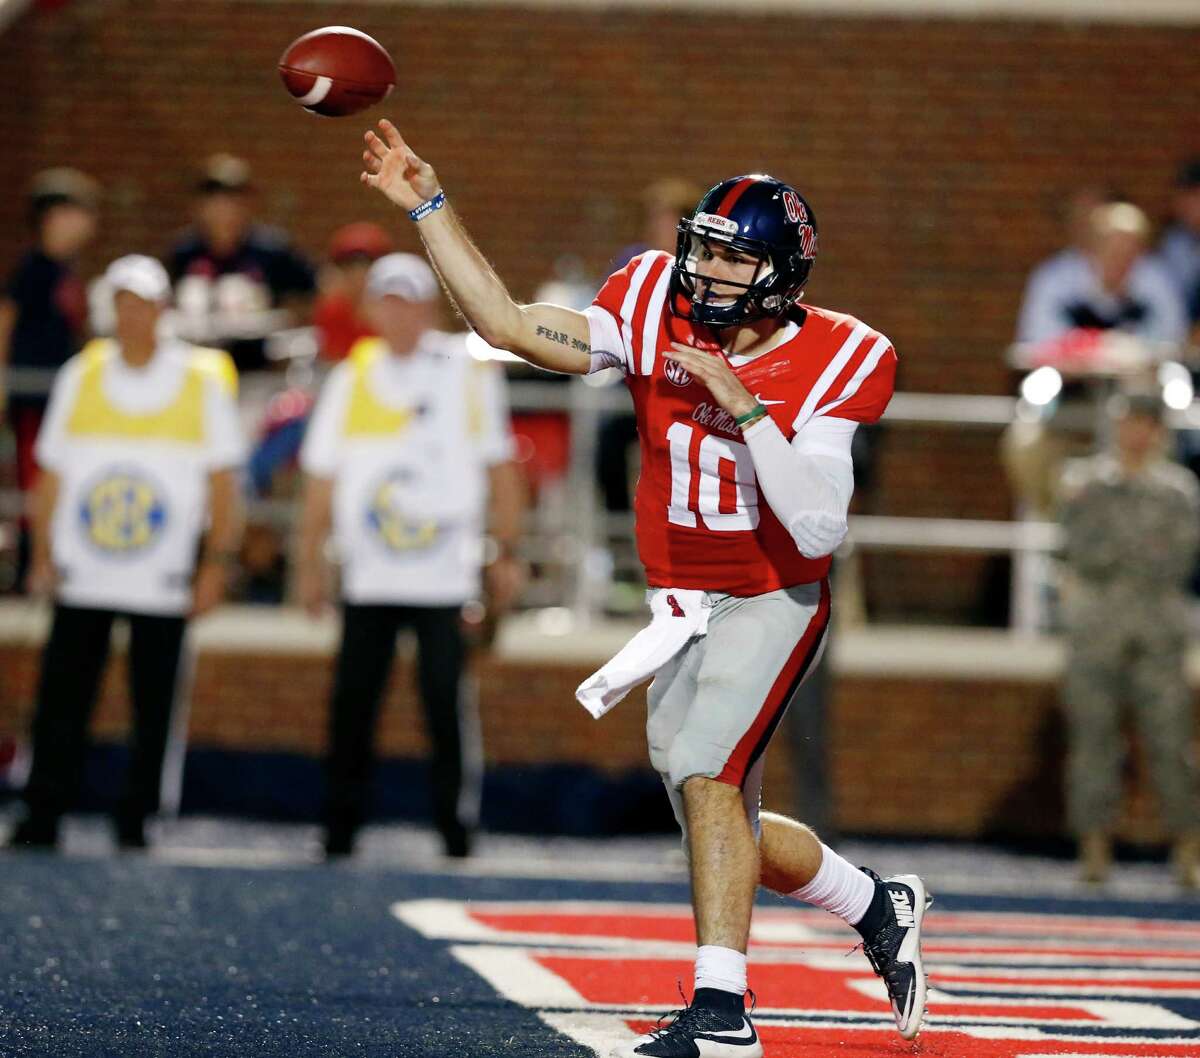 Mississippi quarterback Chad Kelly (10) passes against Texas A&M during the first half of an NCAA college football game in Oxford, Miss., Saturday, Oct. 24, 2015. (AP Photo/Rogelio V. Solis)